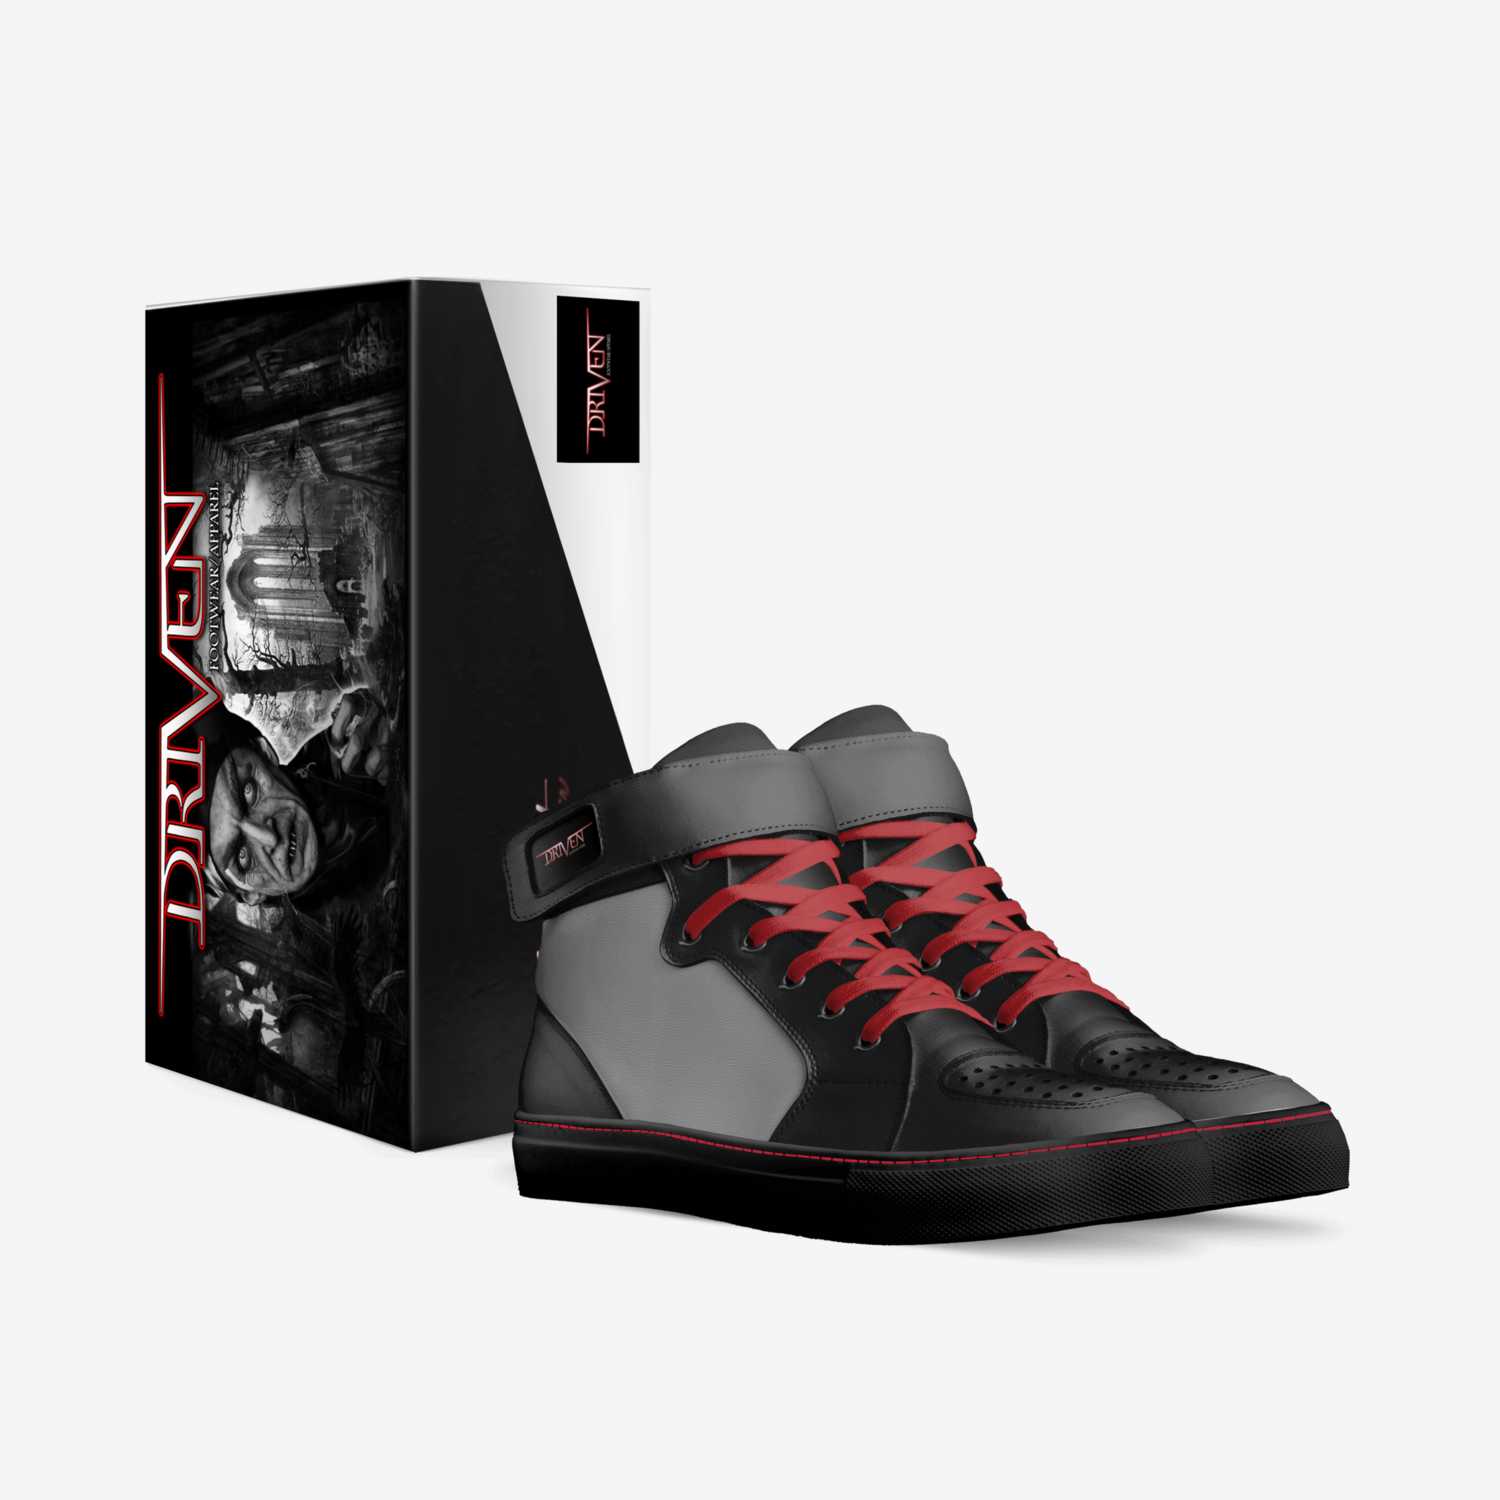 nosferatu custom made in Italy shoes by Jason Oberly | Box view